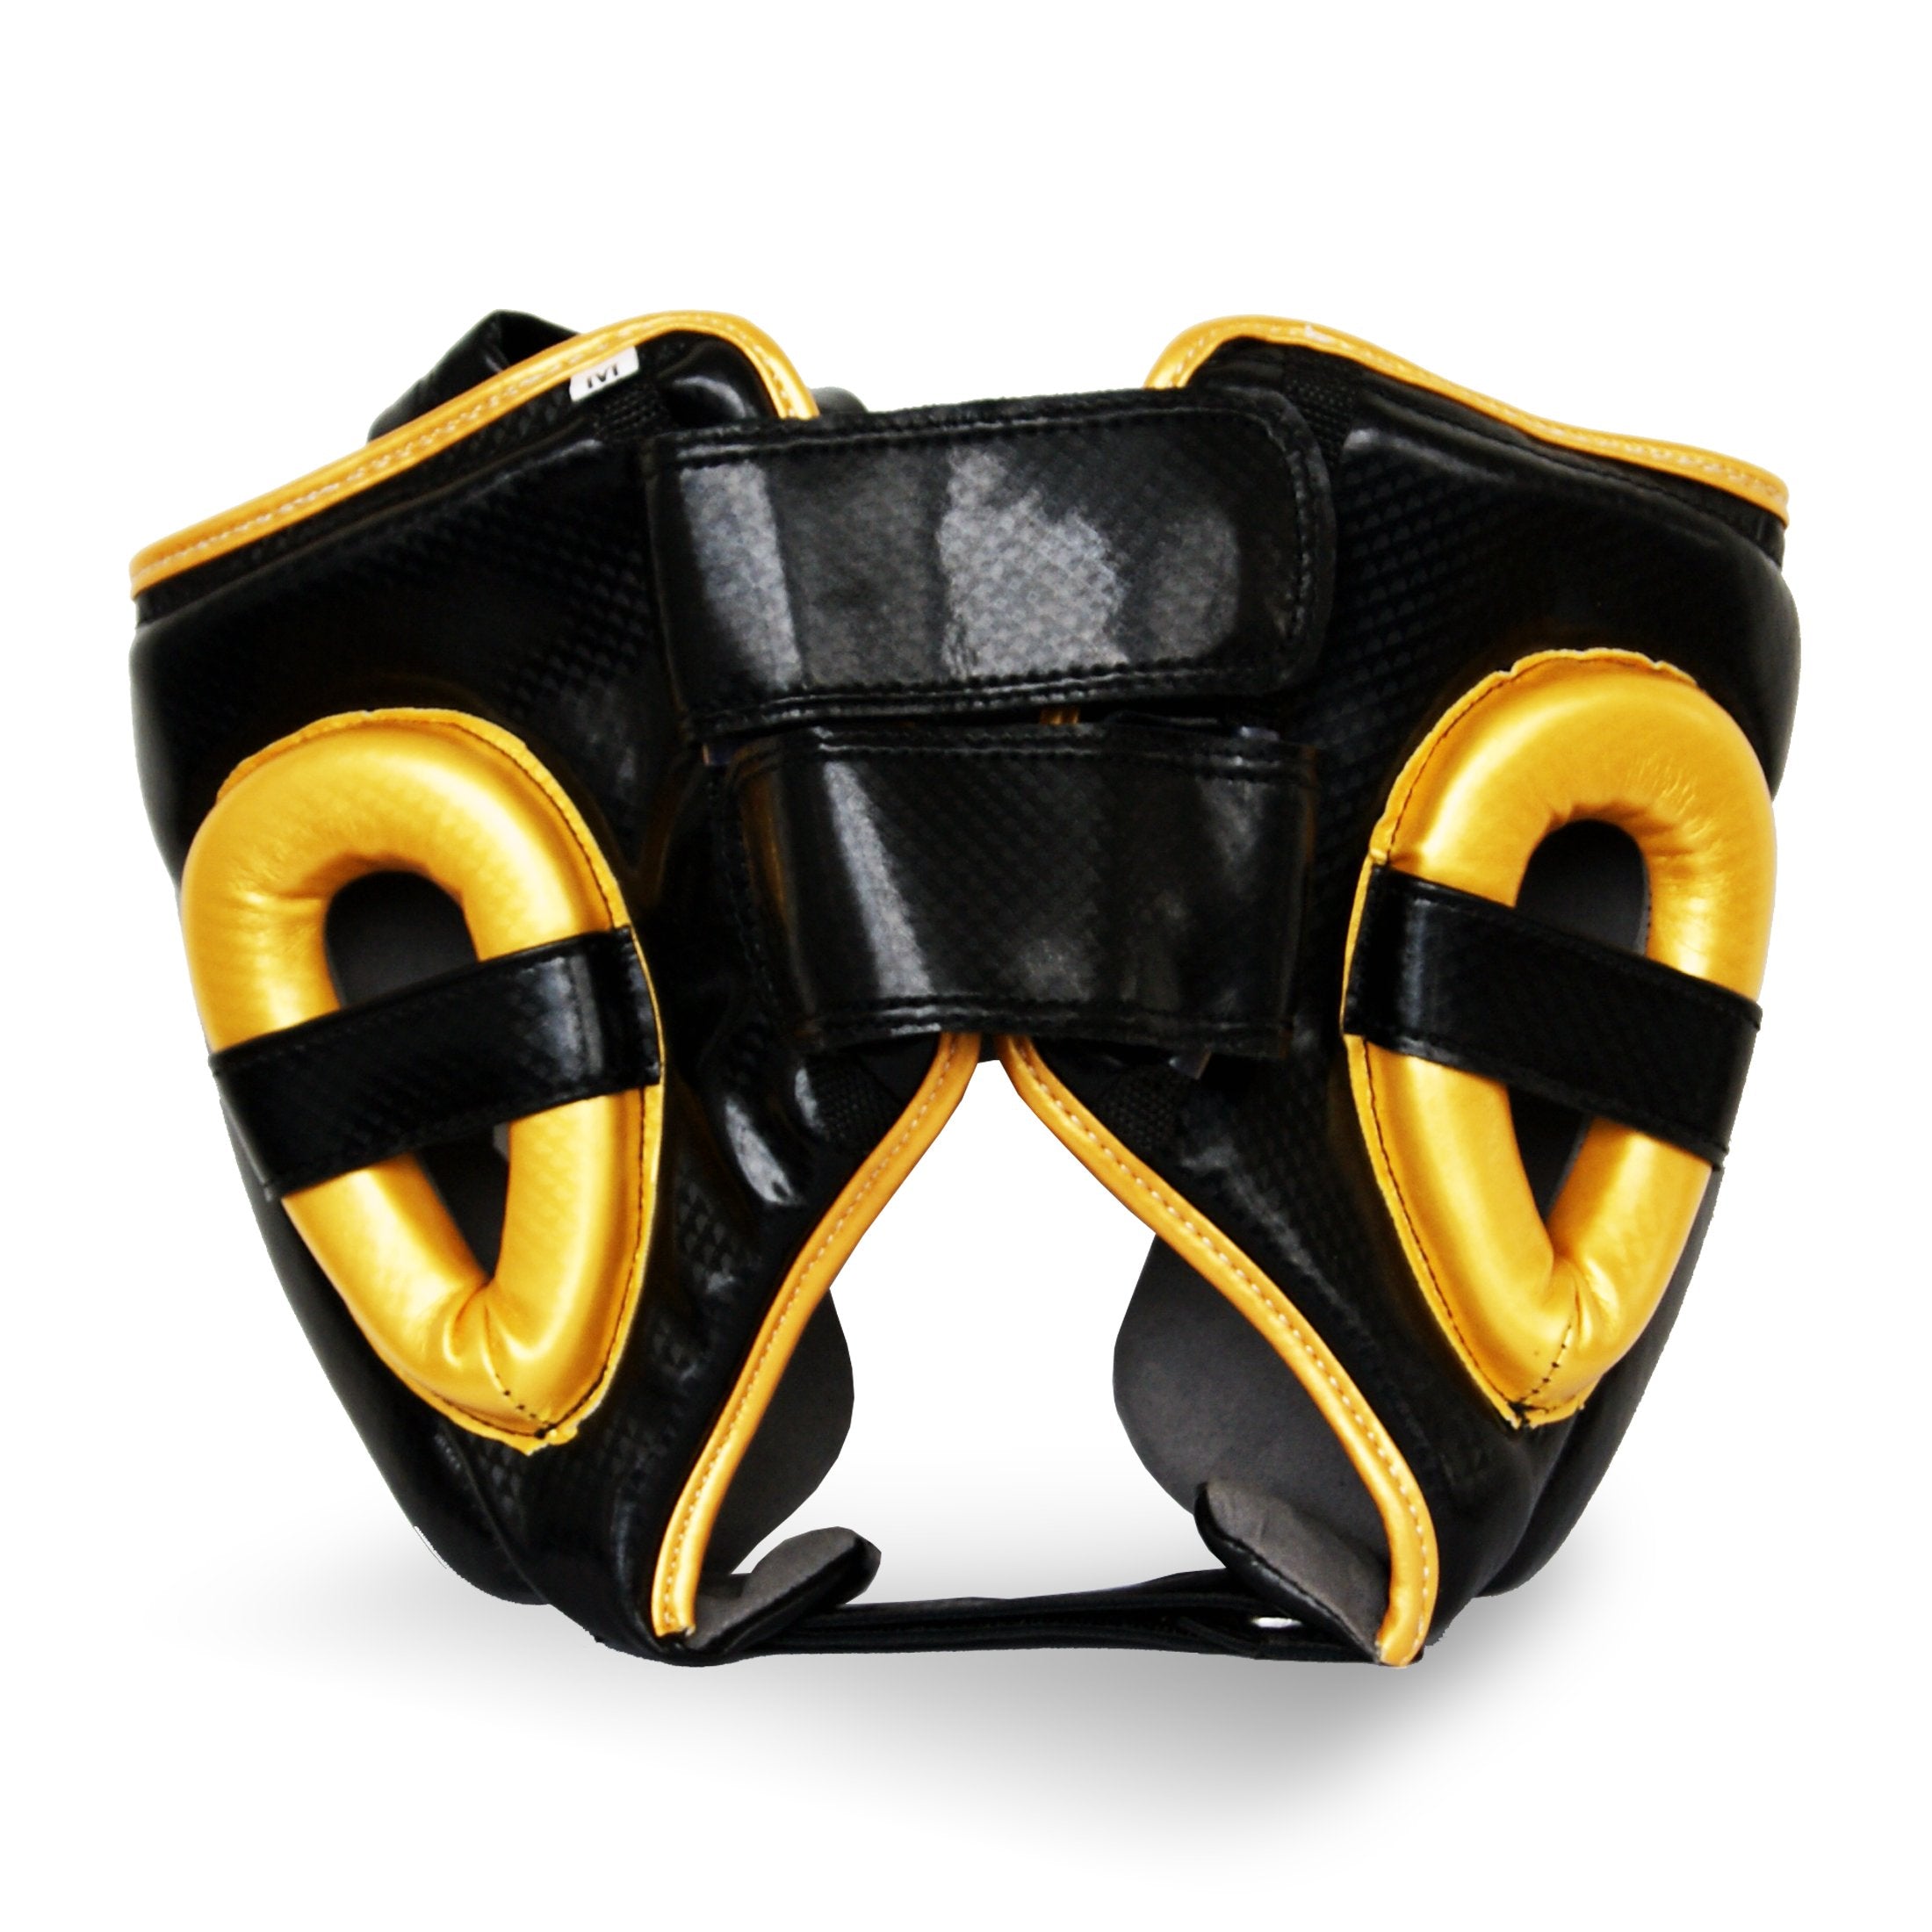 Pro Fitness Head Guard Synthetic Leather Metallic Black / Gold